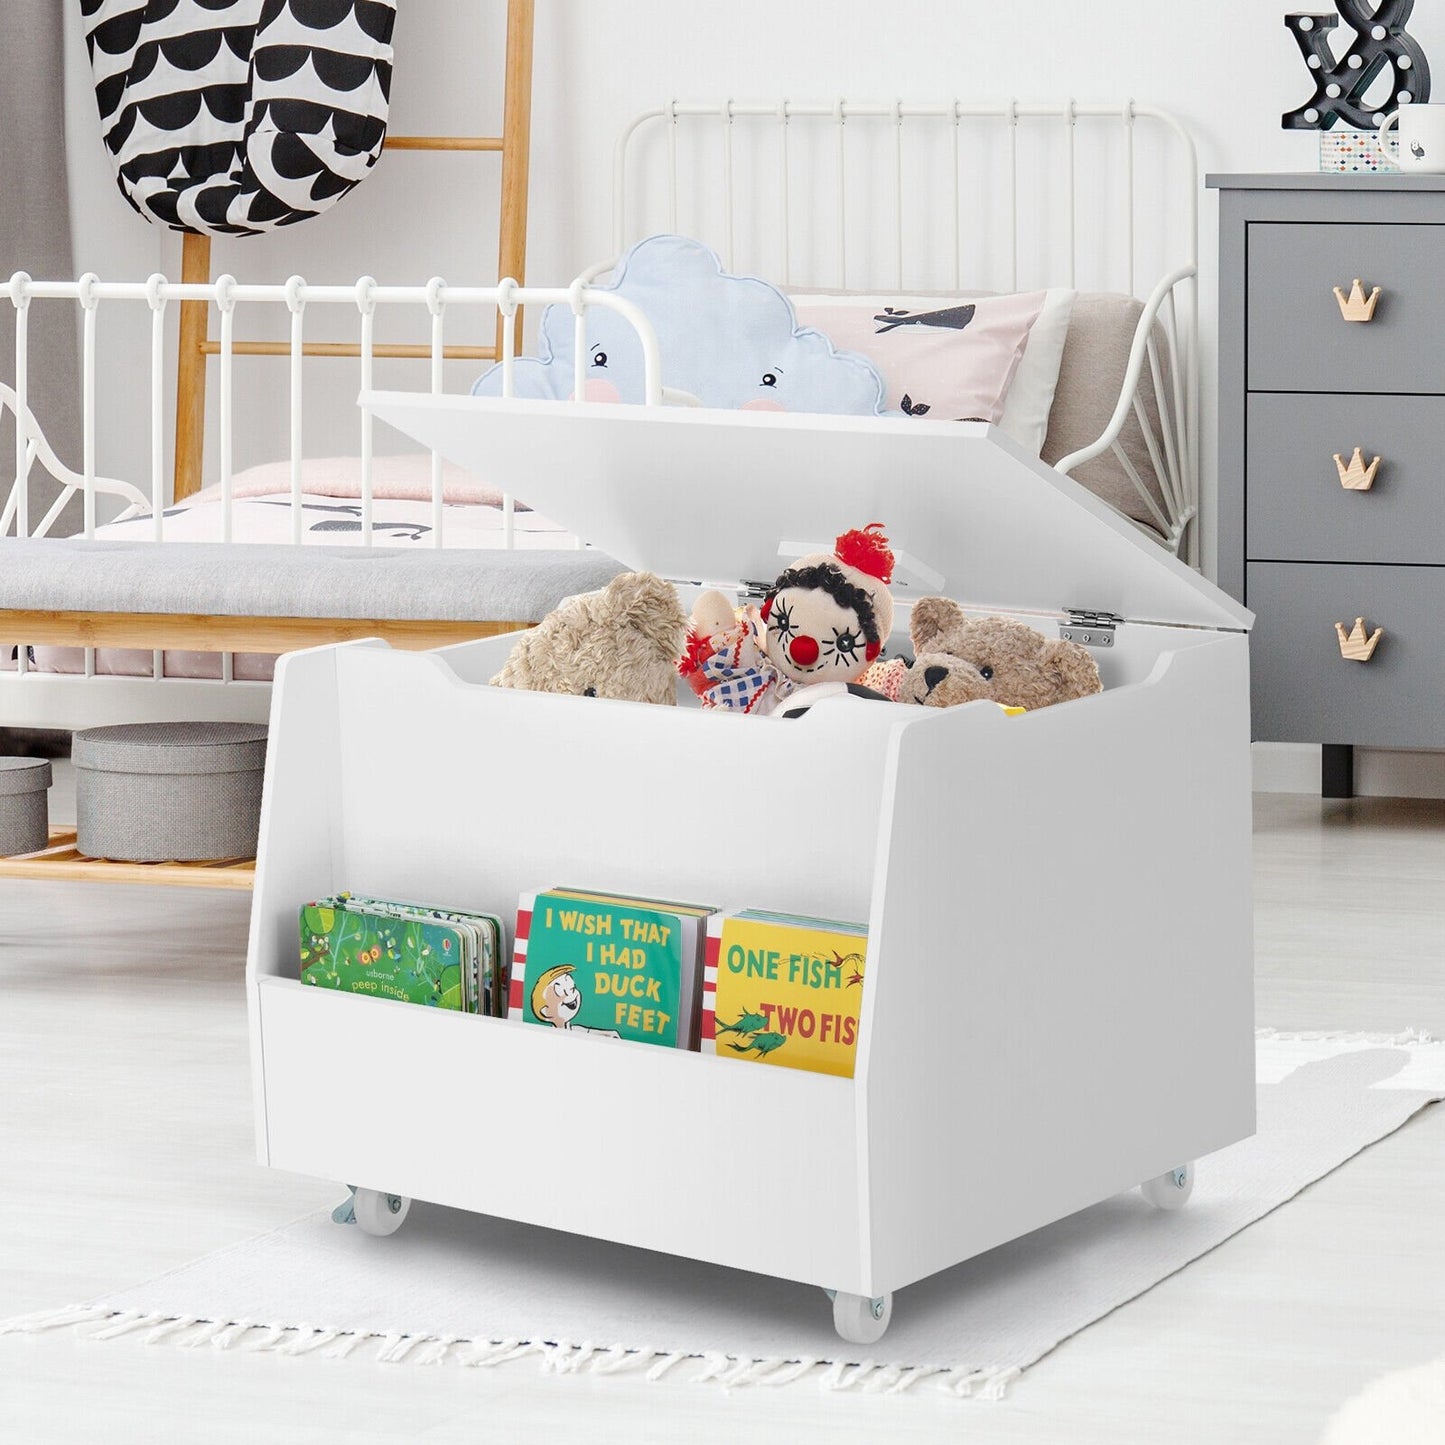 Wooden Mobile Toy Storage Organizer with Bookshelf and Lockable Wheels, White